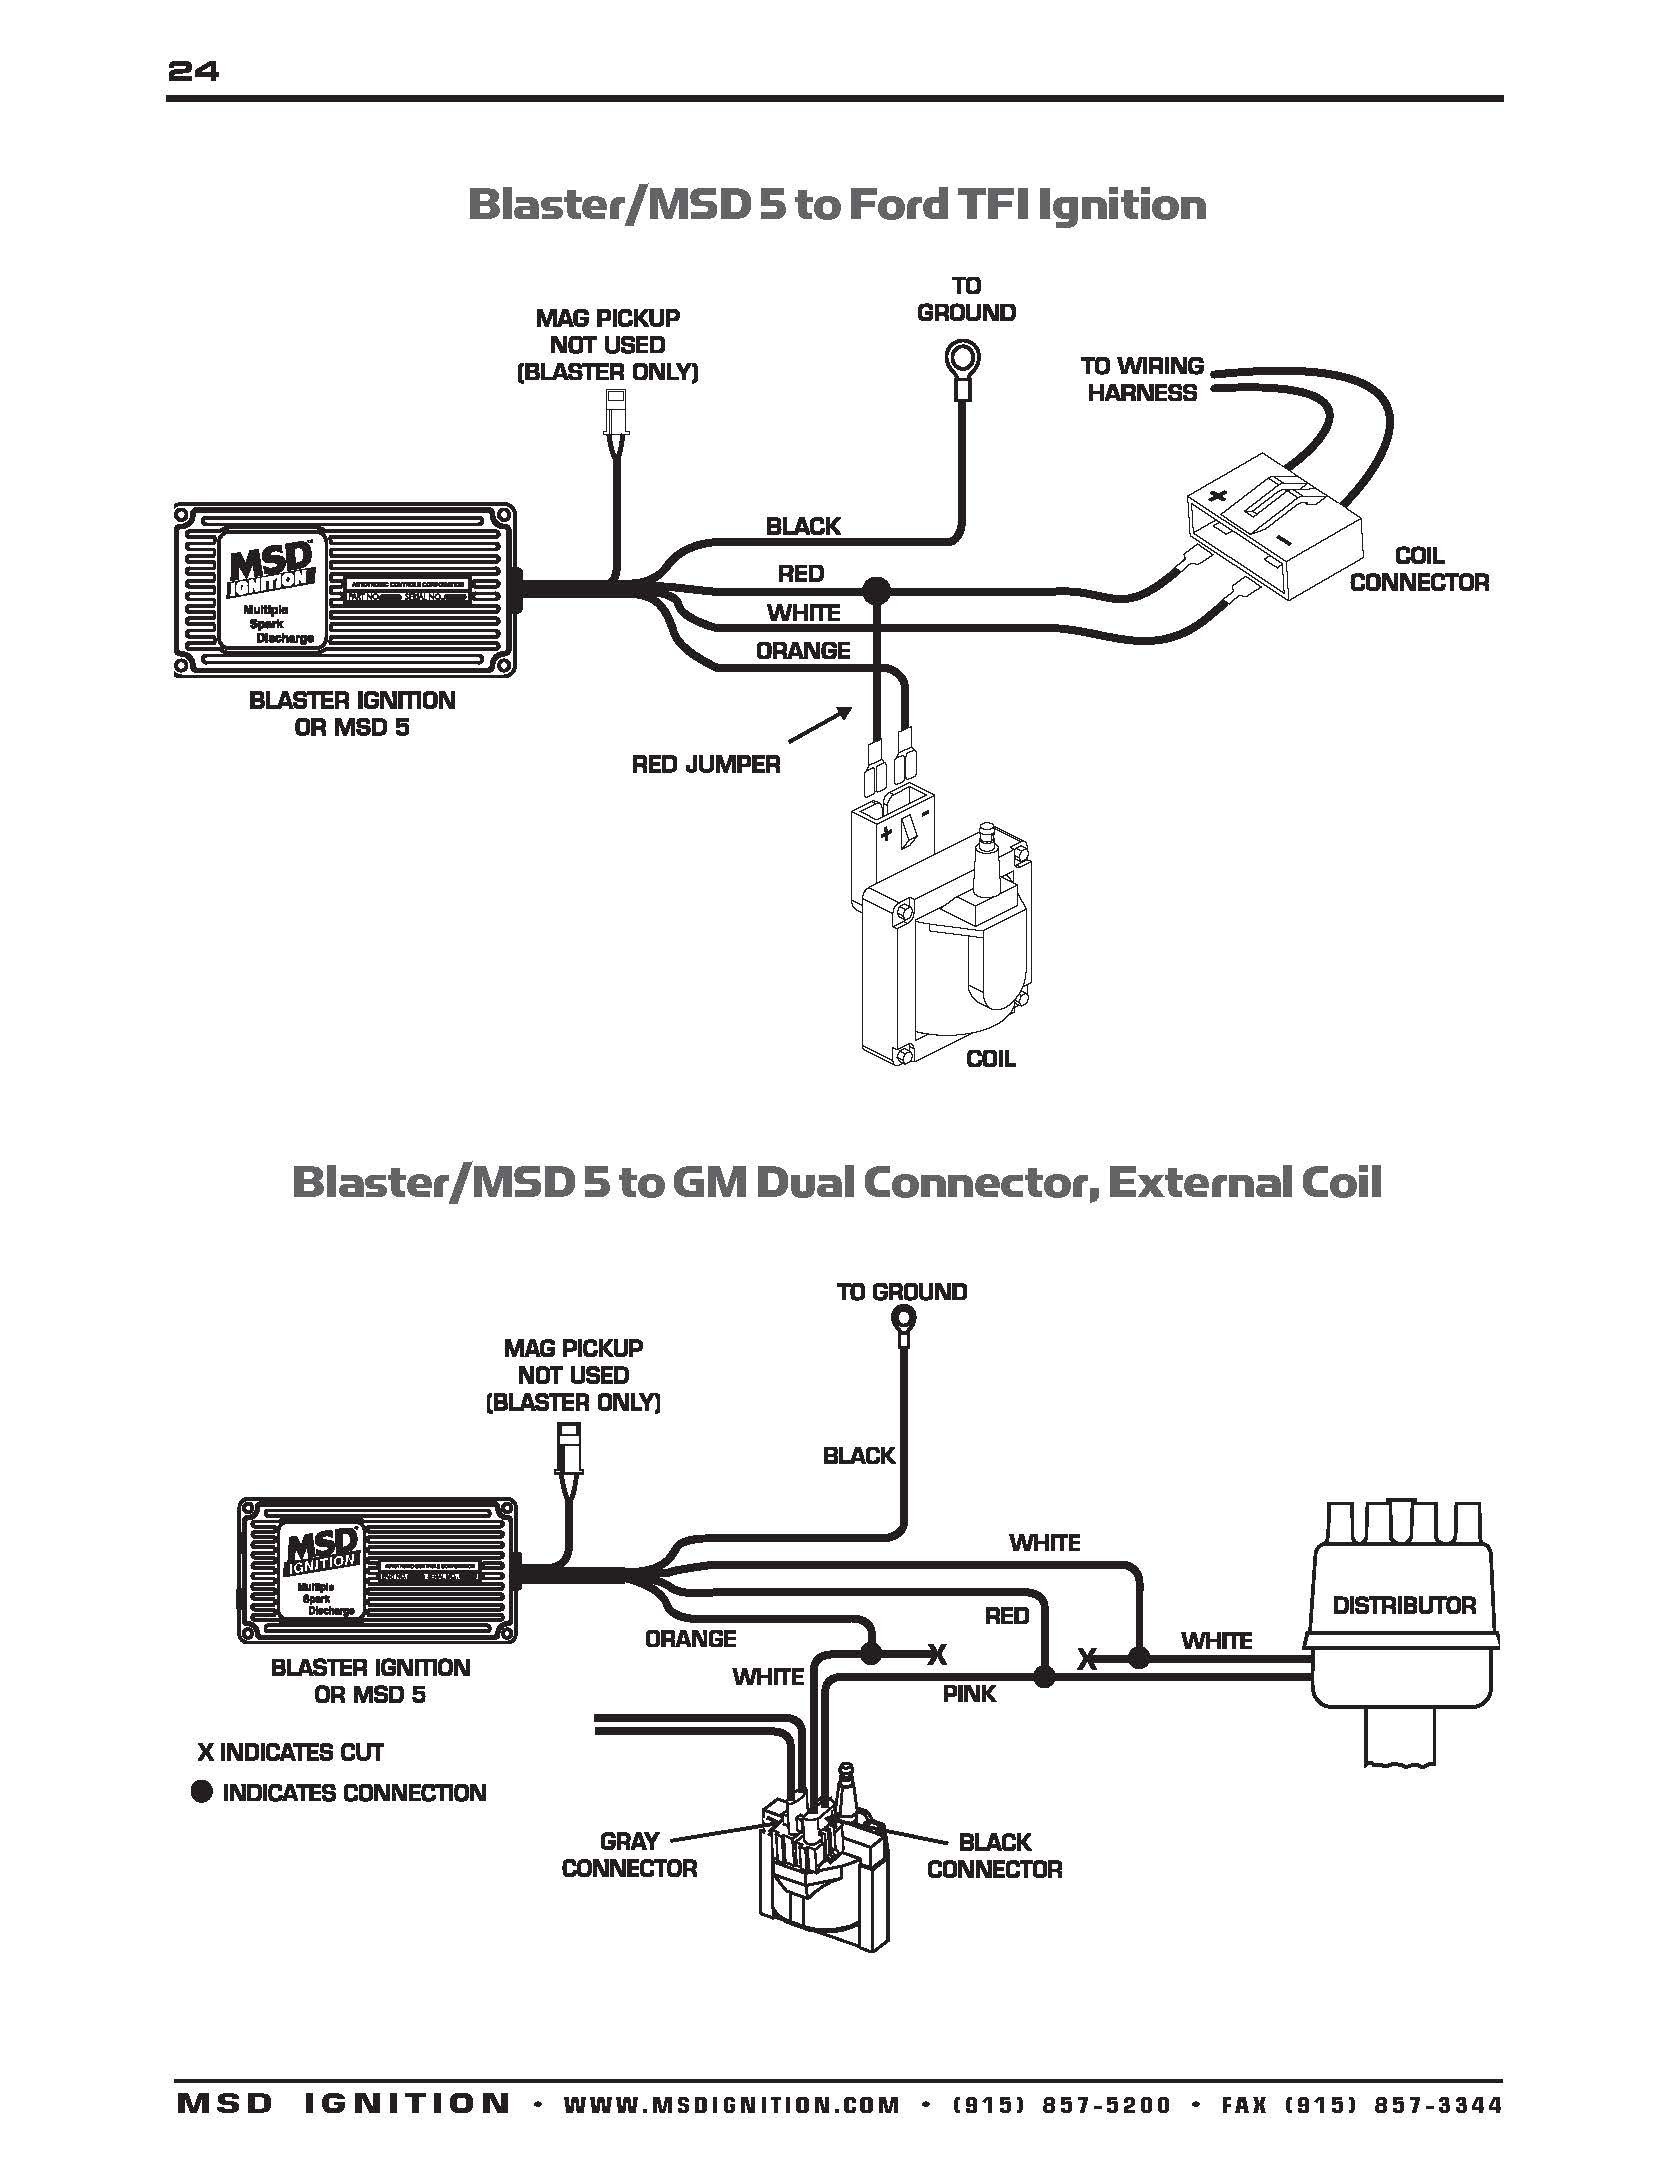 Briggs and Stratton Coil Wiring Diagram Chromatex Briggs and Stratton Ignition Coil Wiring Diagram Image